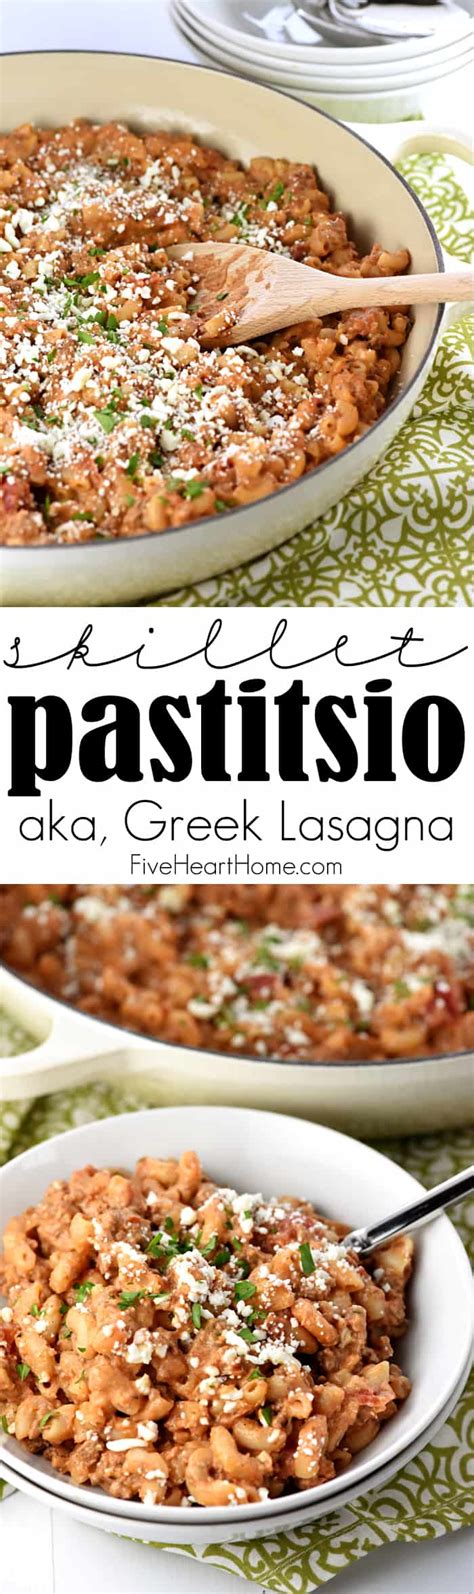 quick-easy-skillet-easy-pastitsio-recipe-30-minute-meal image